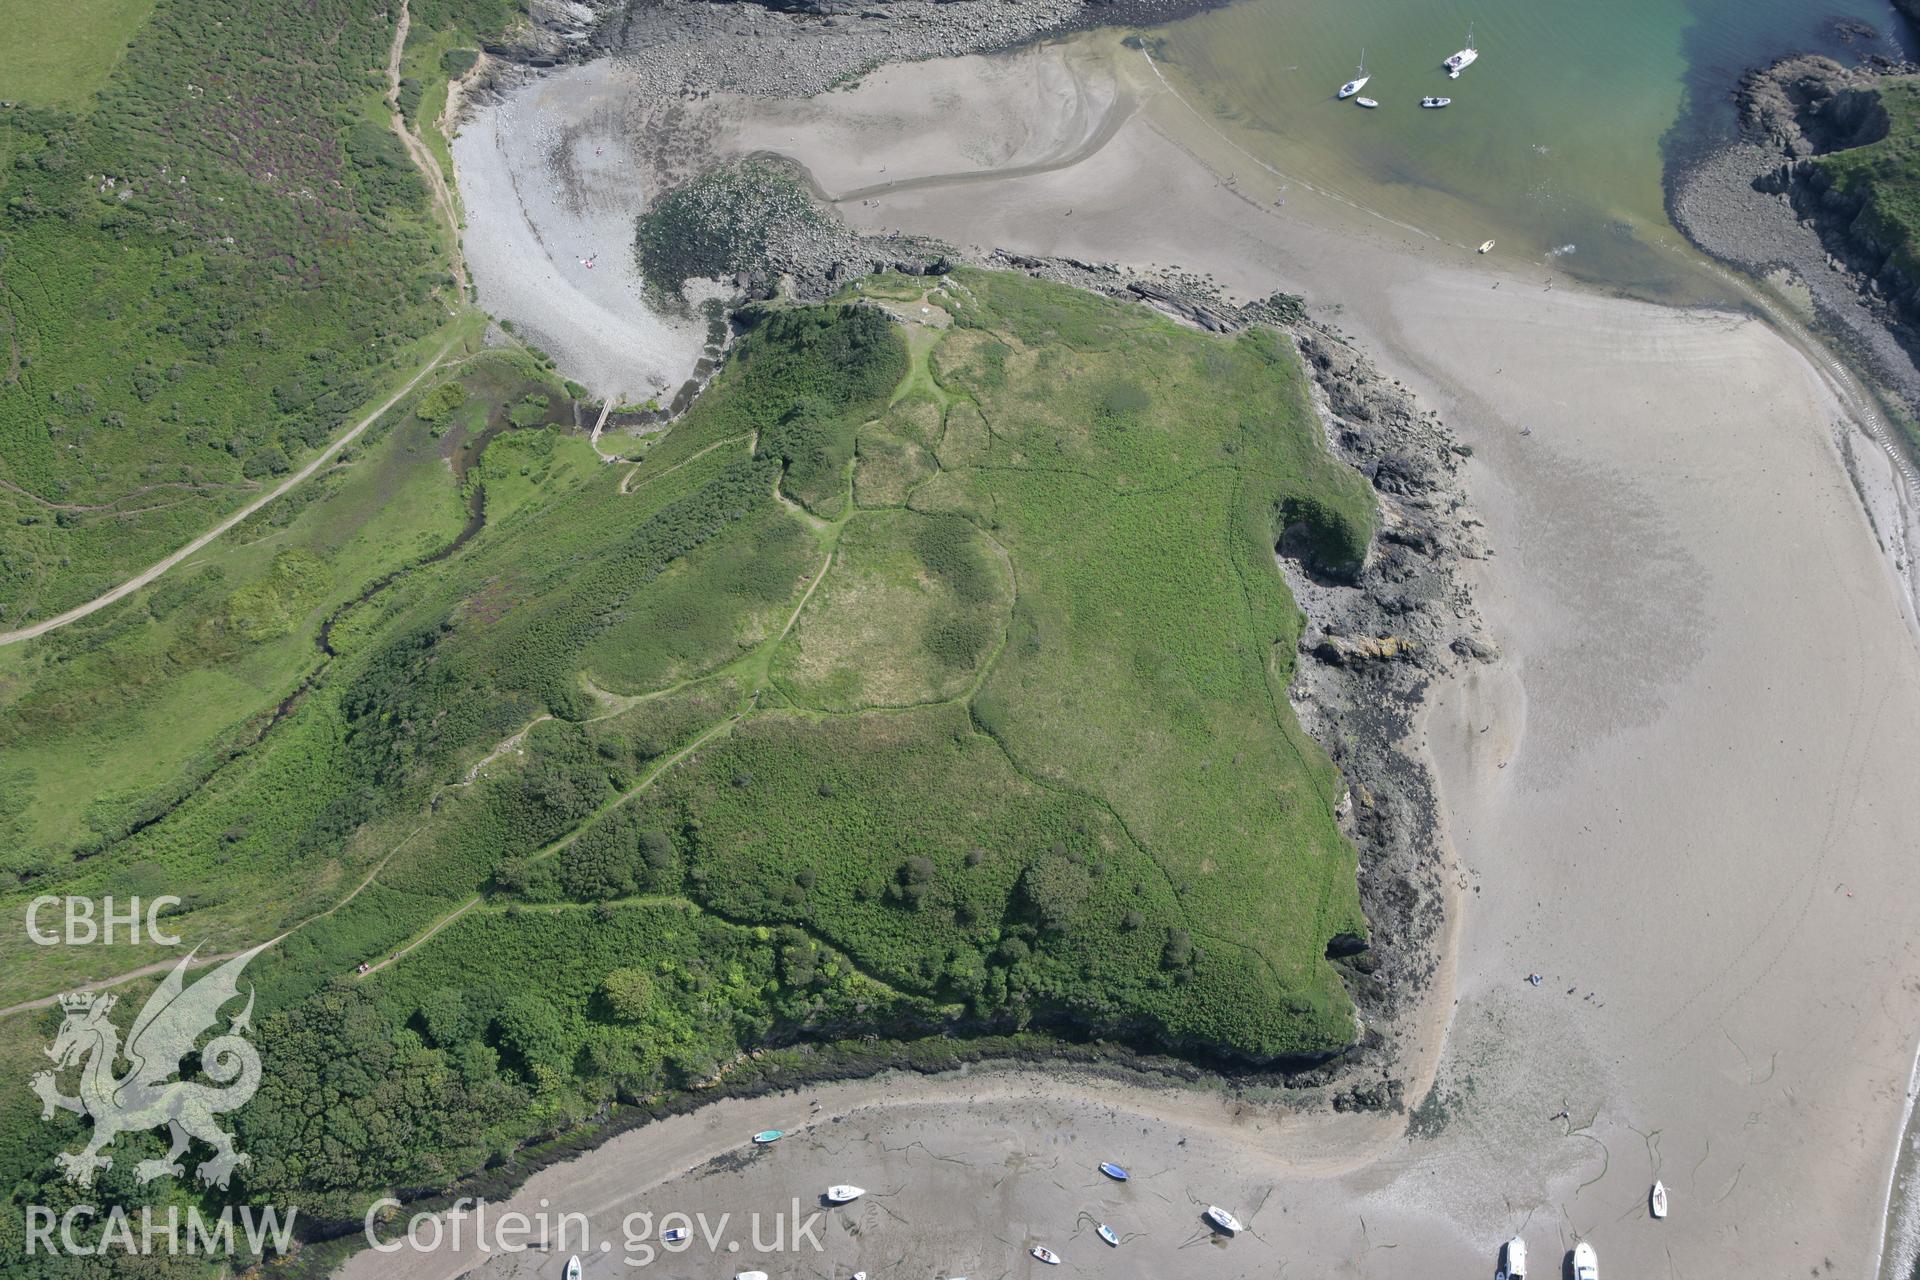 RCAHMW colour oblique photograph of Gribin, promontory fort south of Solva. Taken by Toby Driver on 01/08/2007.